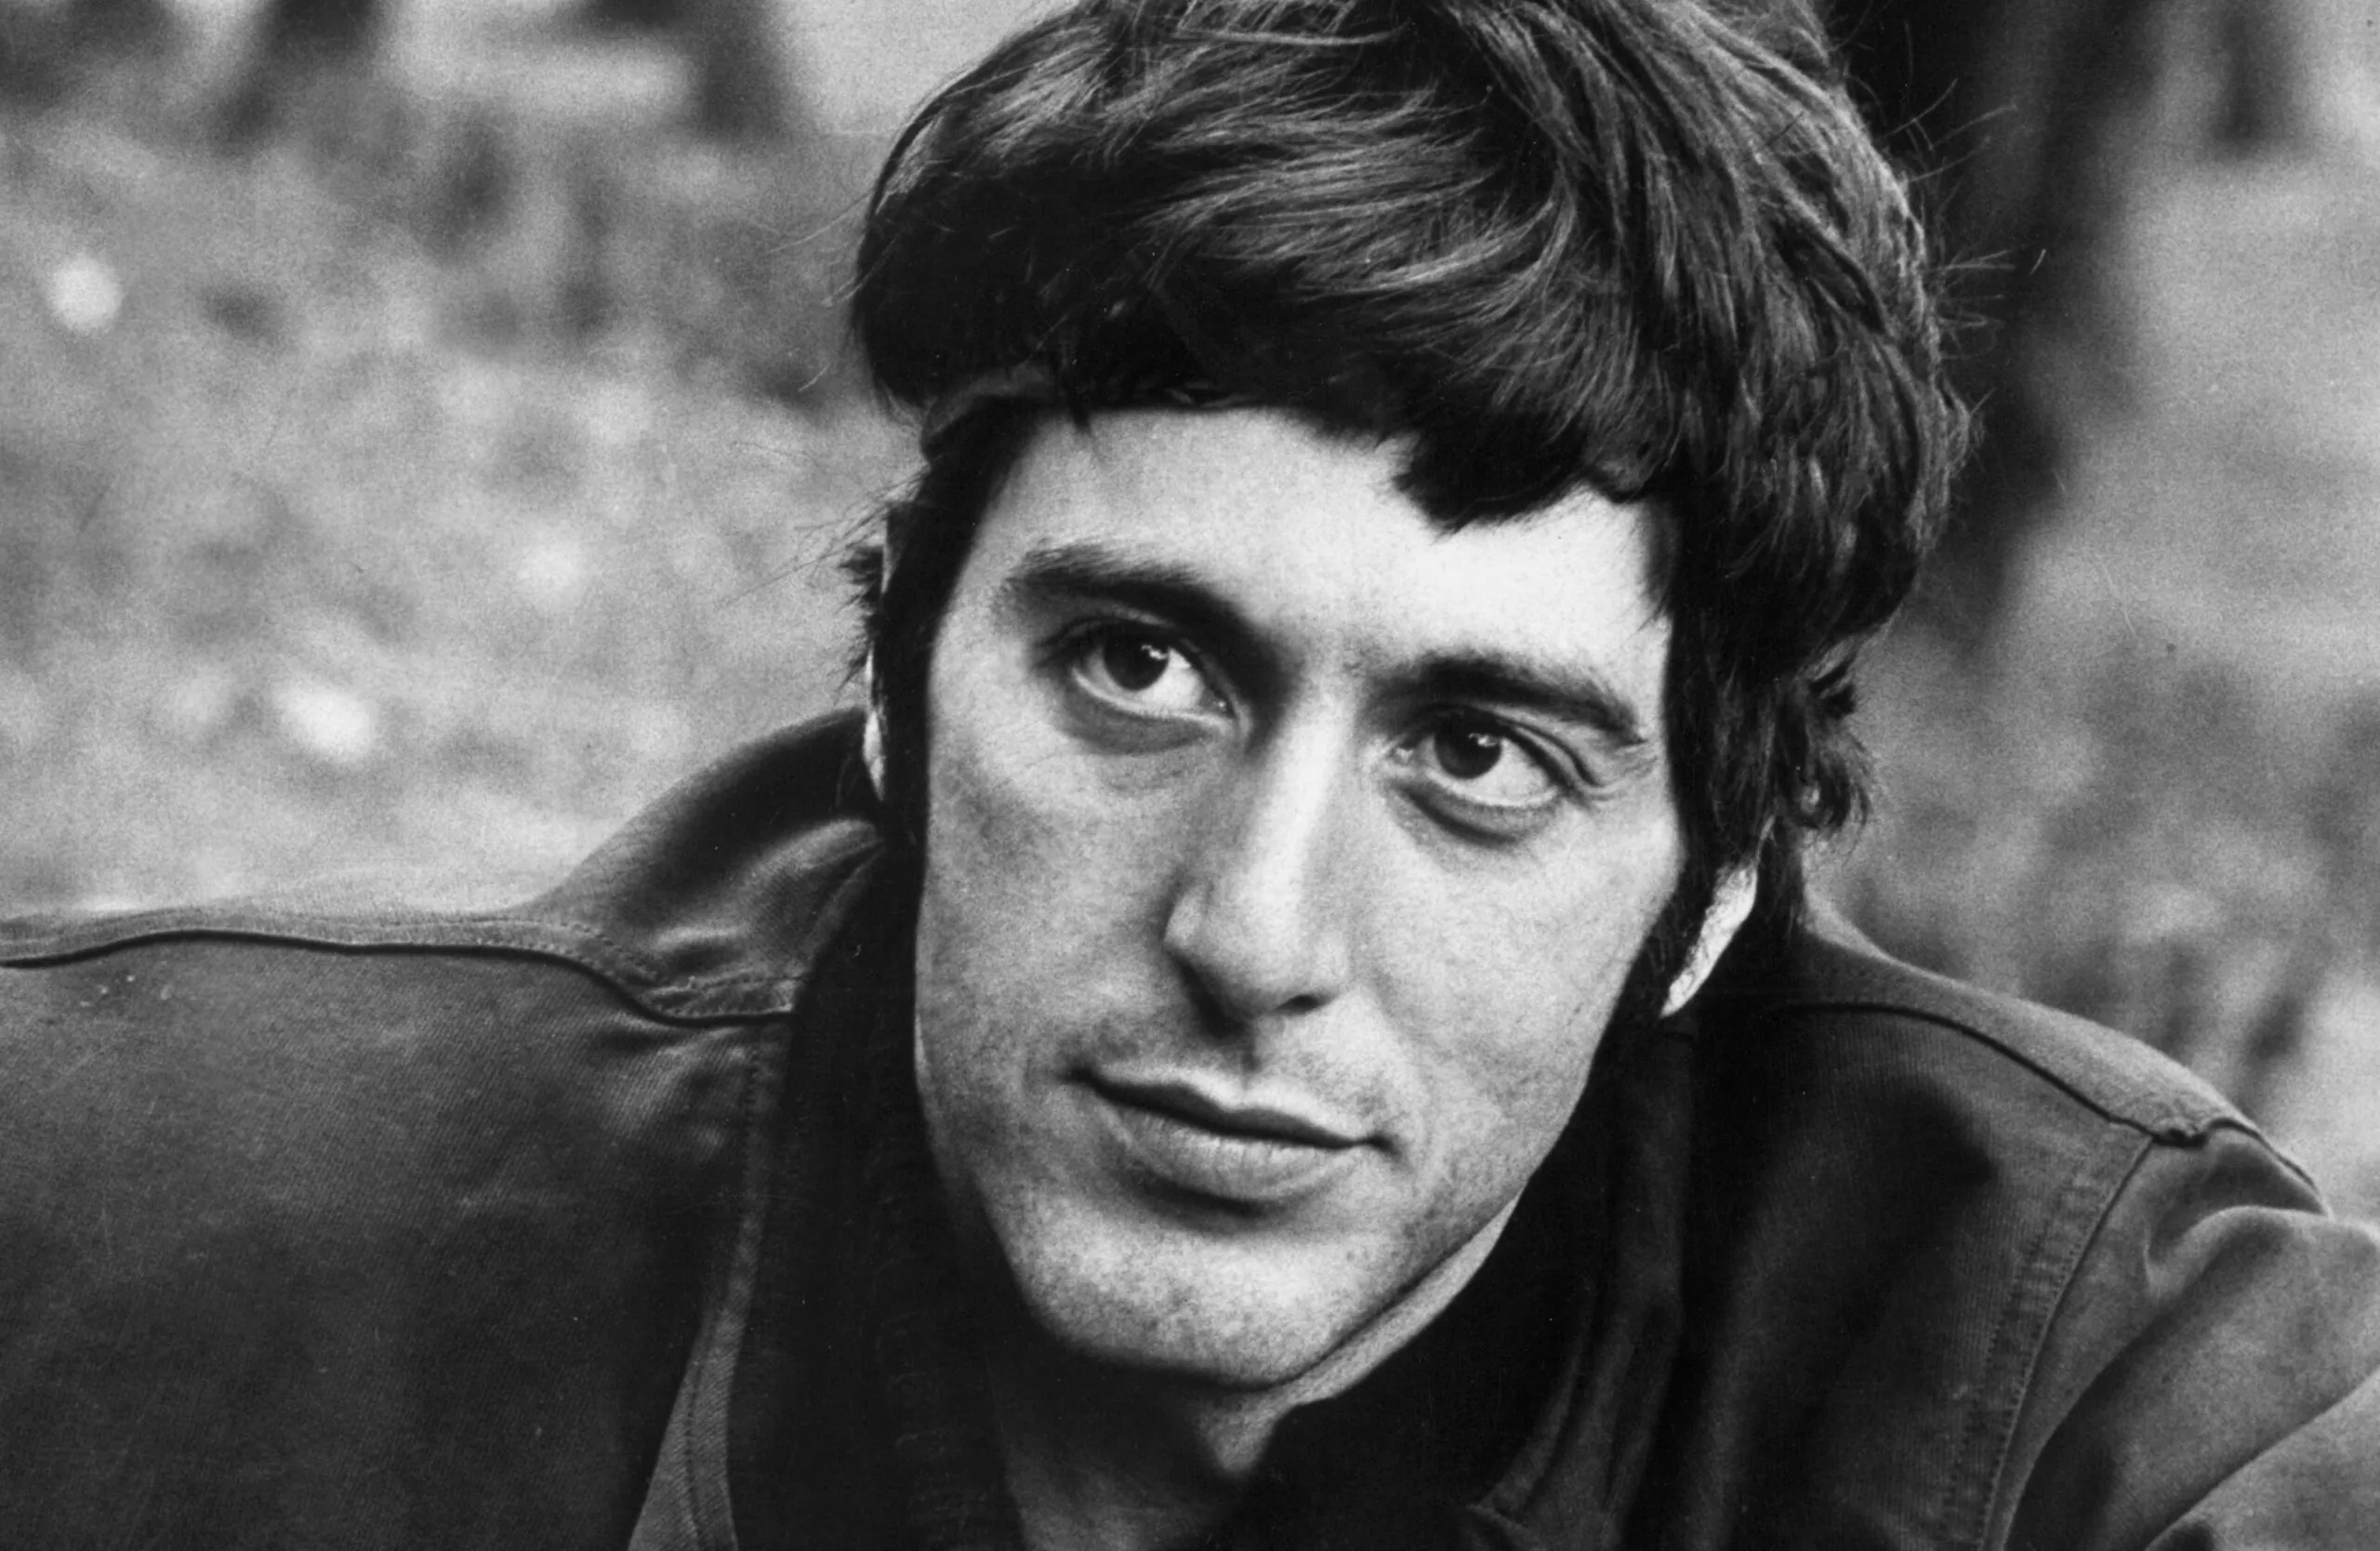 The Early life Of Al Pacino